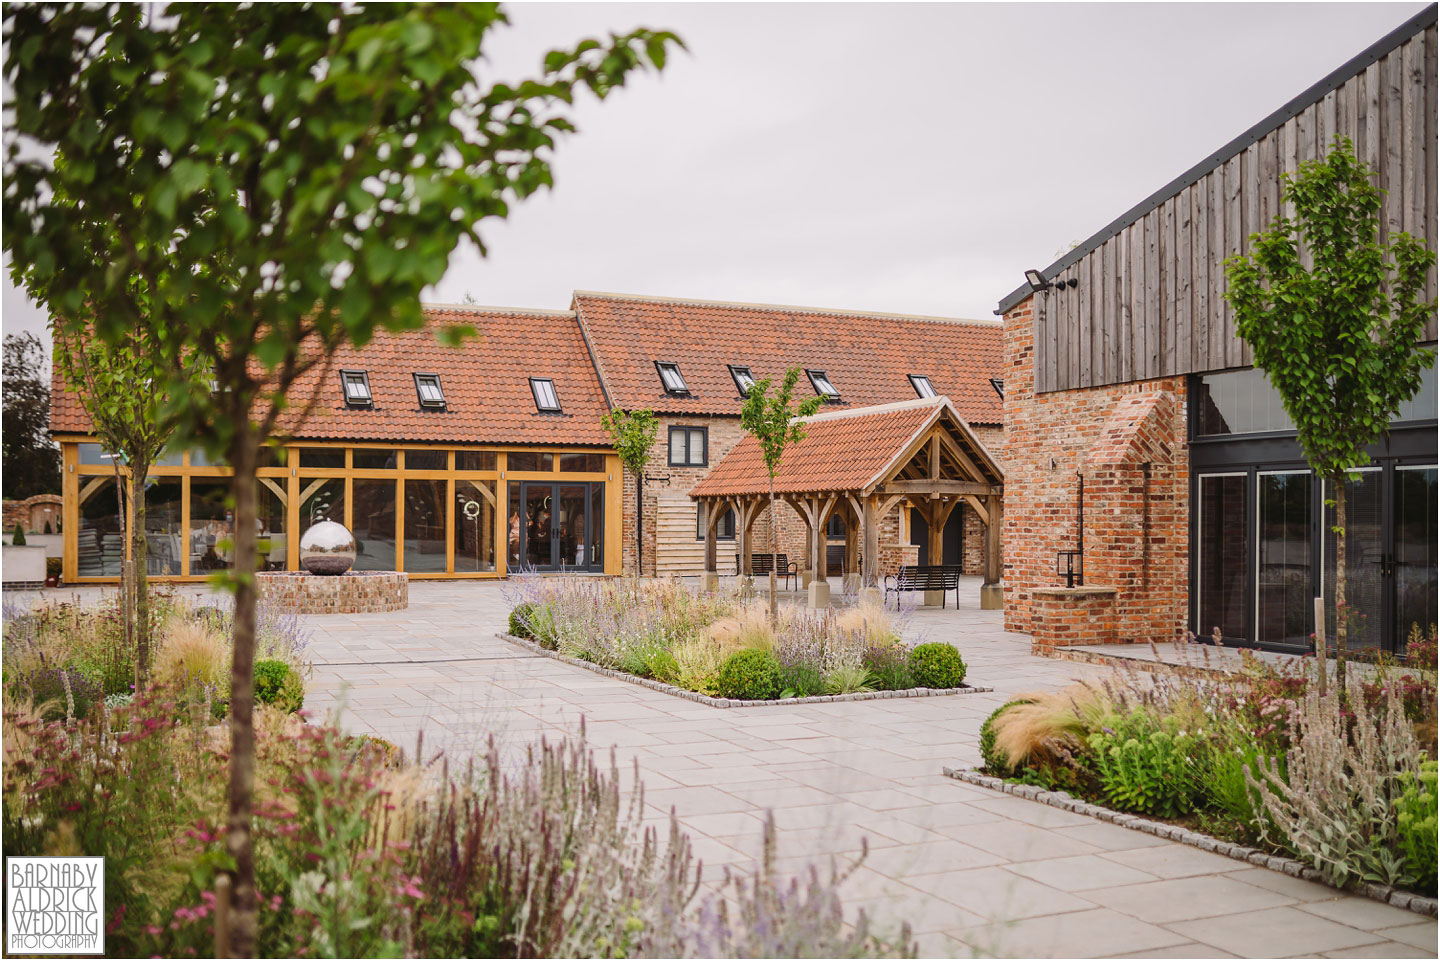 Oakwood at Ryther, Oakwood at Ryther Yorkshire. Oakwood at Ryther Yorkshire Wedding Barn Venue, Best Yorkshire Wedding Barn Venues, Best Yorkshire Wedding Barns, Yorkshire Barn Venues